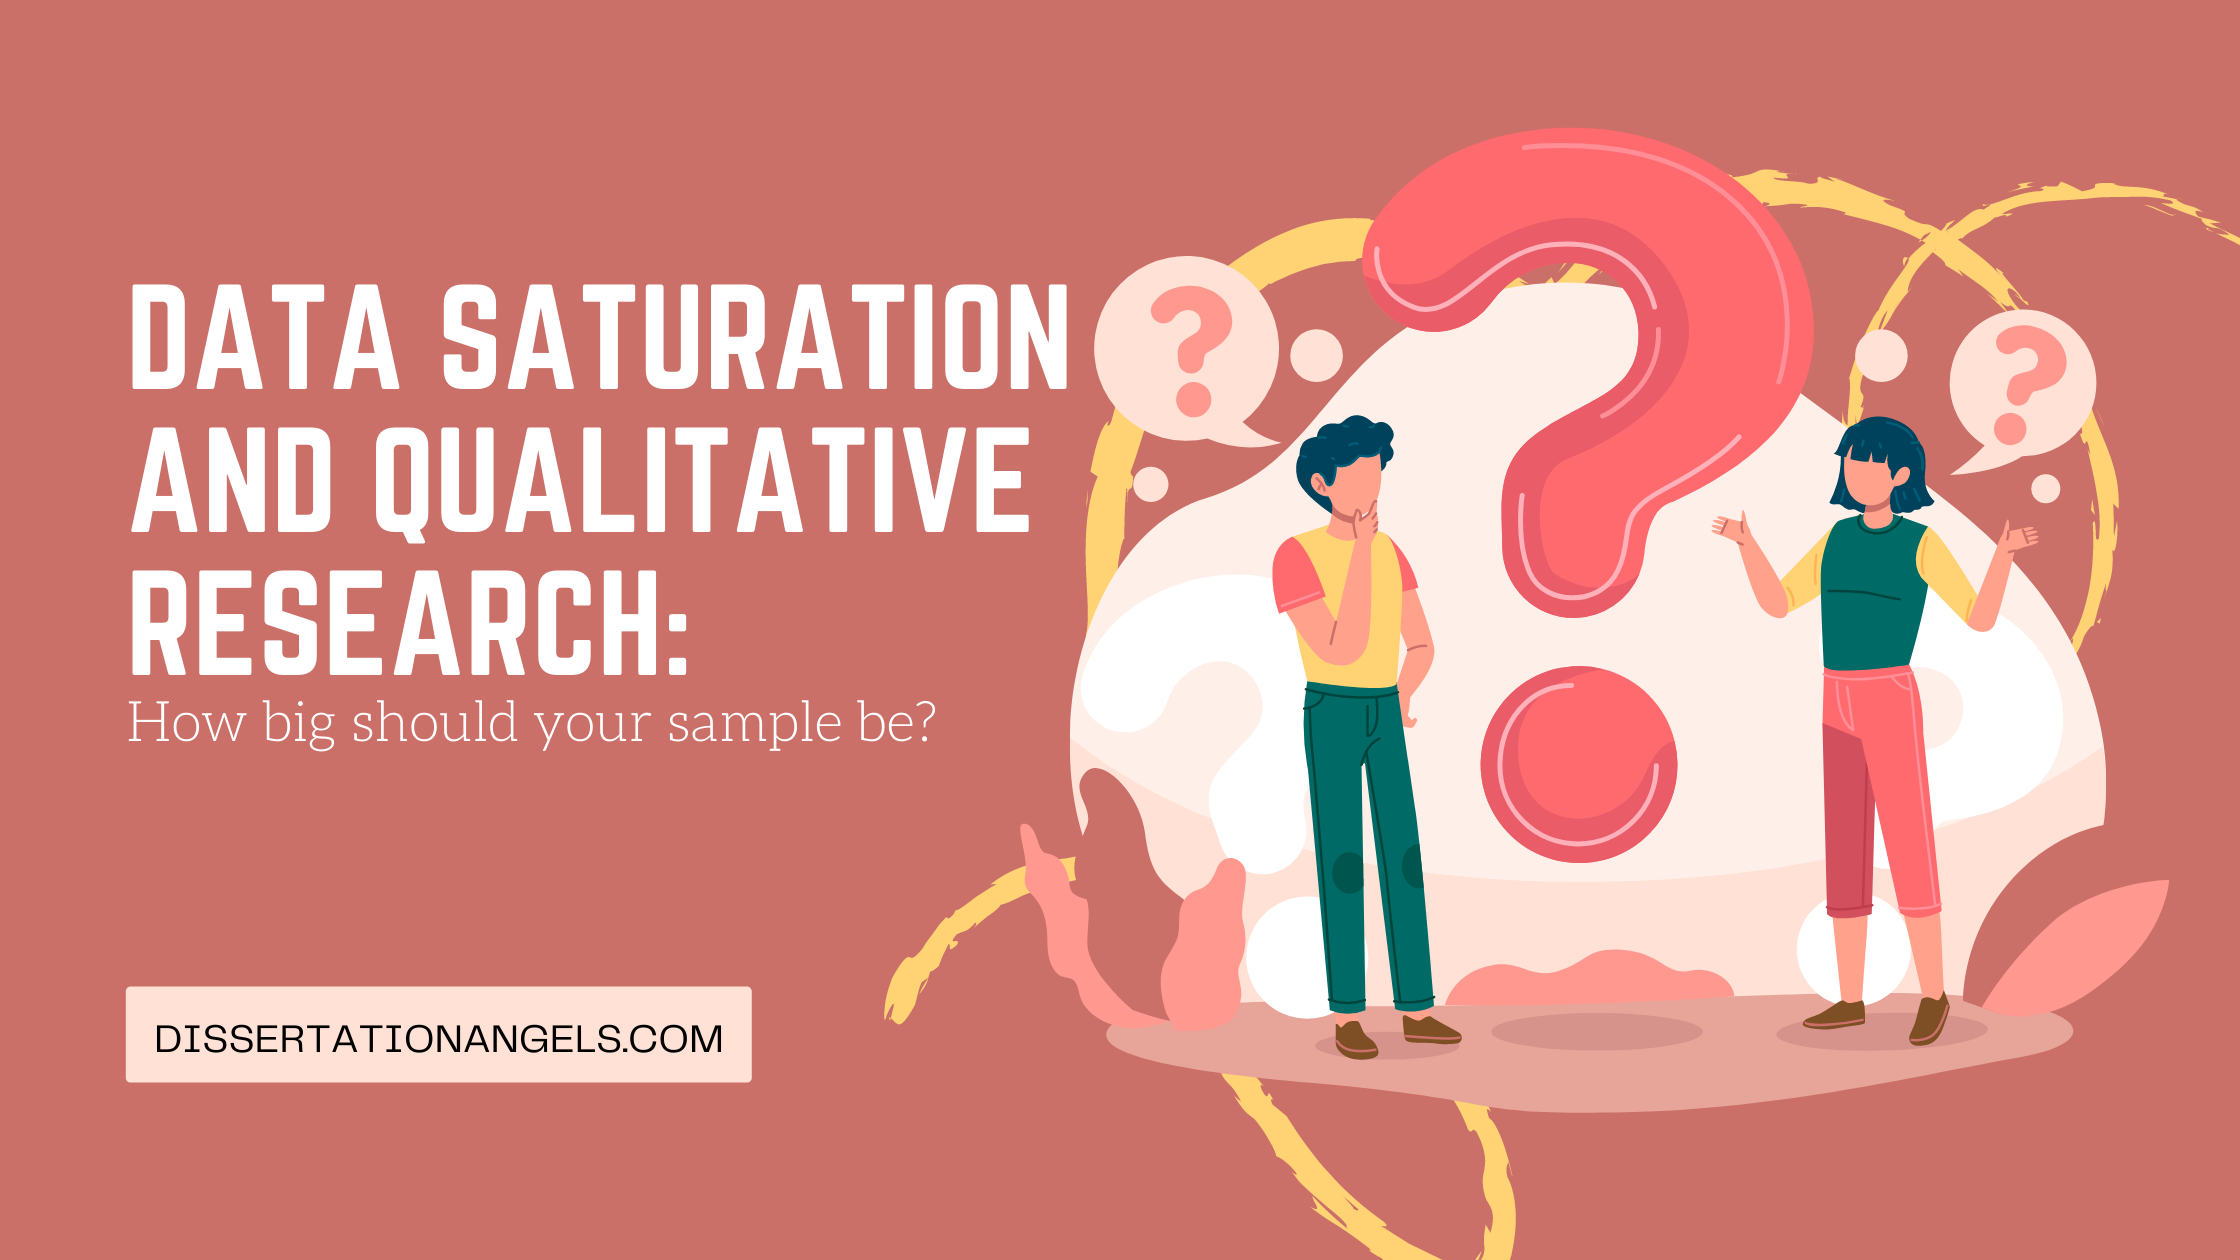 data saturation in case study